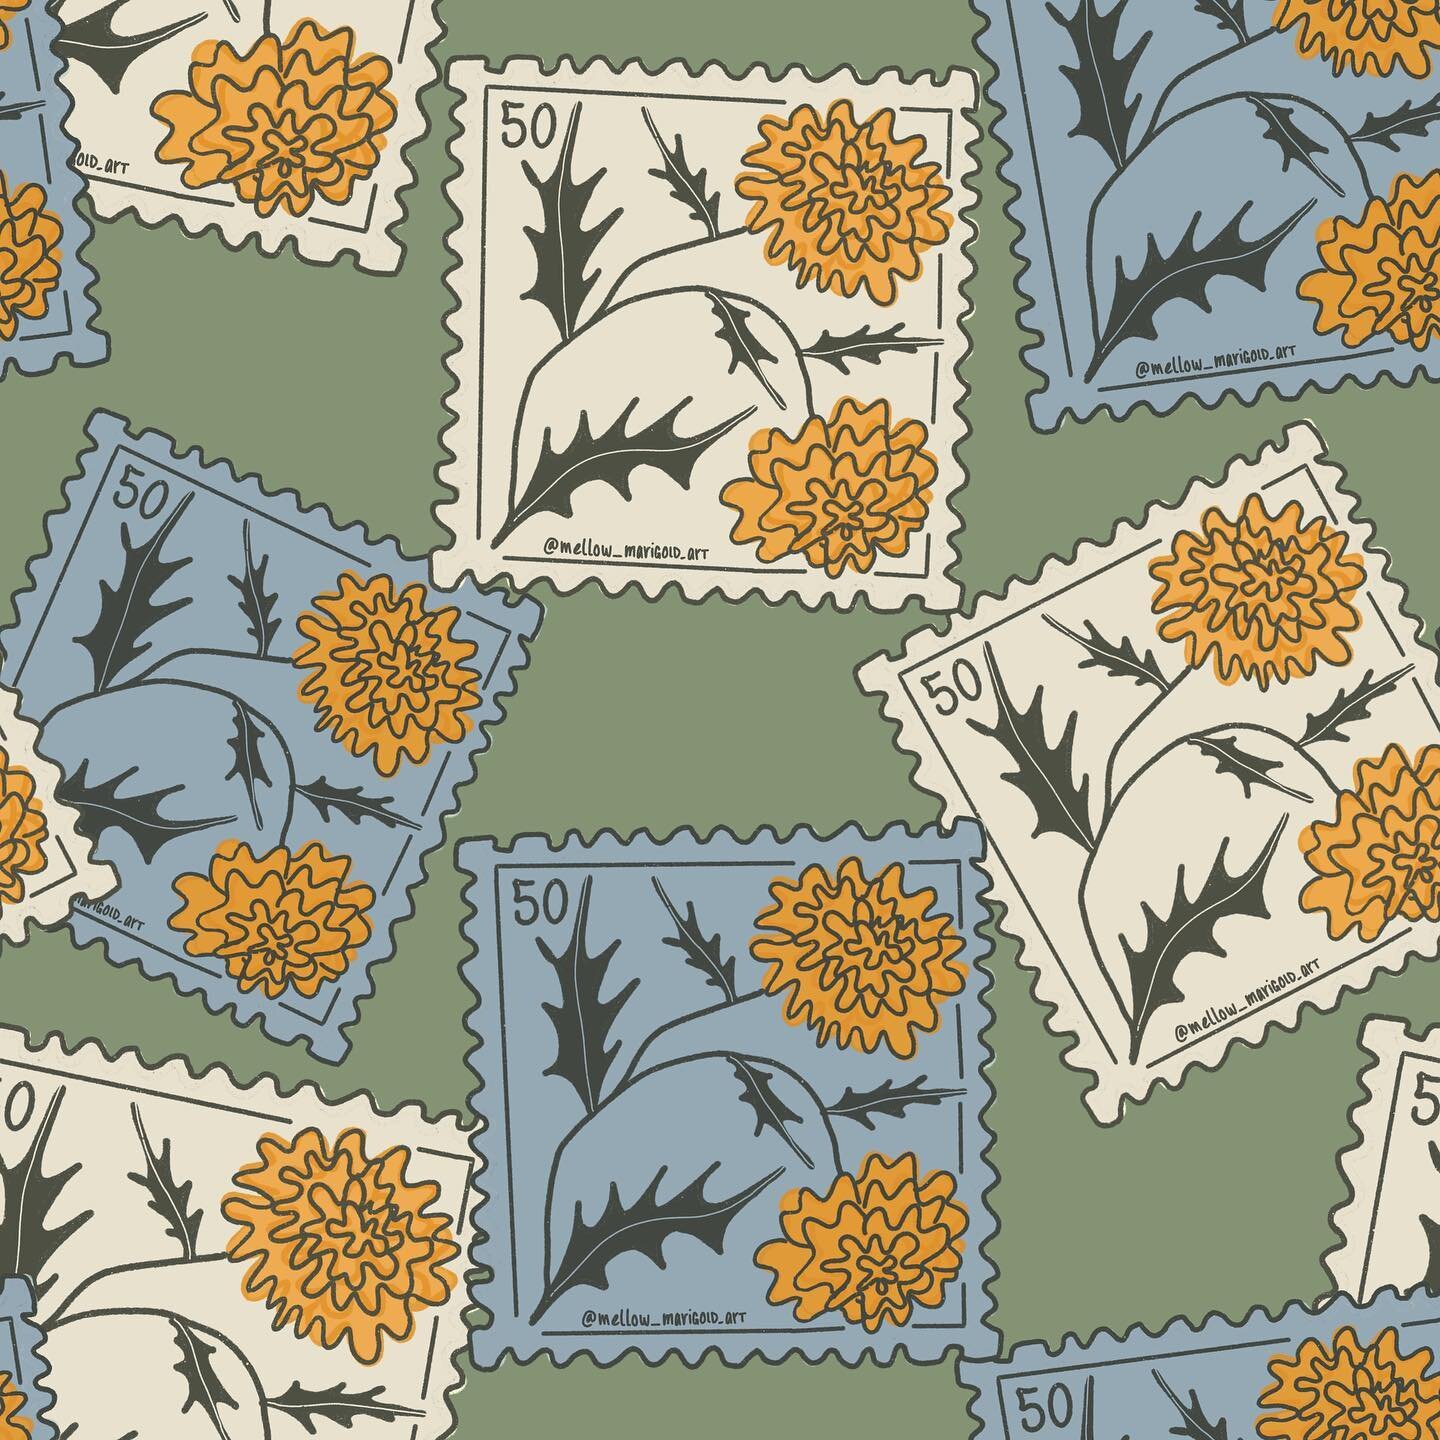 New cute pattern that I finished today 😍 Mellow Marigold Mail! ✉️ #patterndesign #illustration #illustrationartists